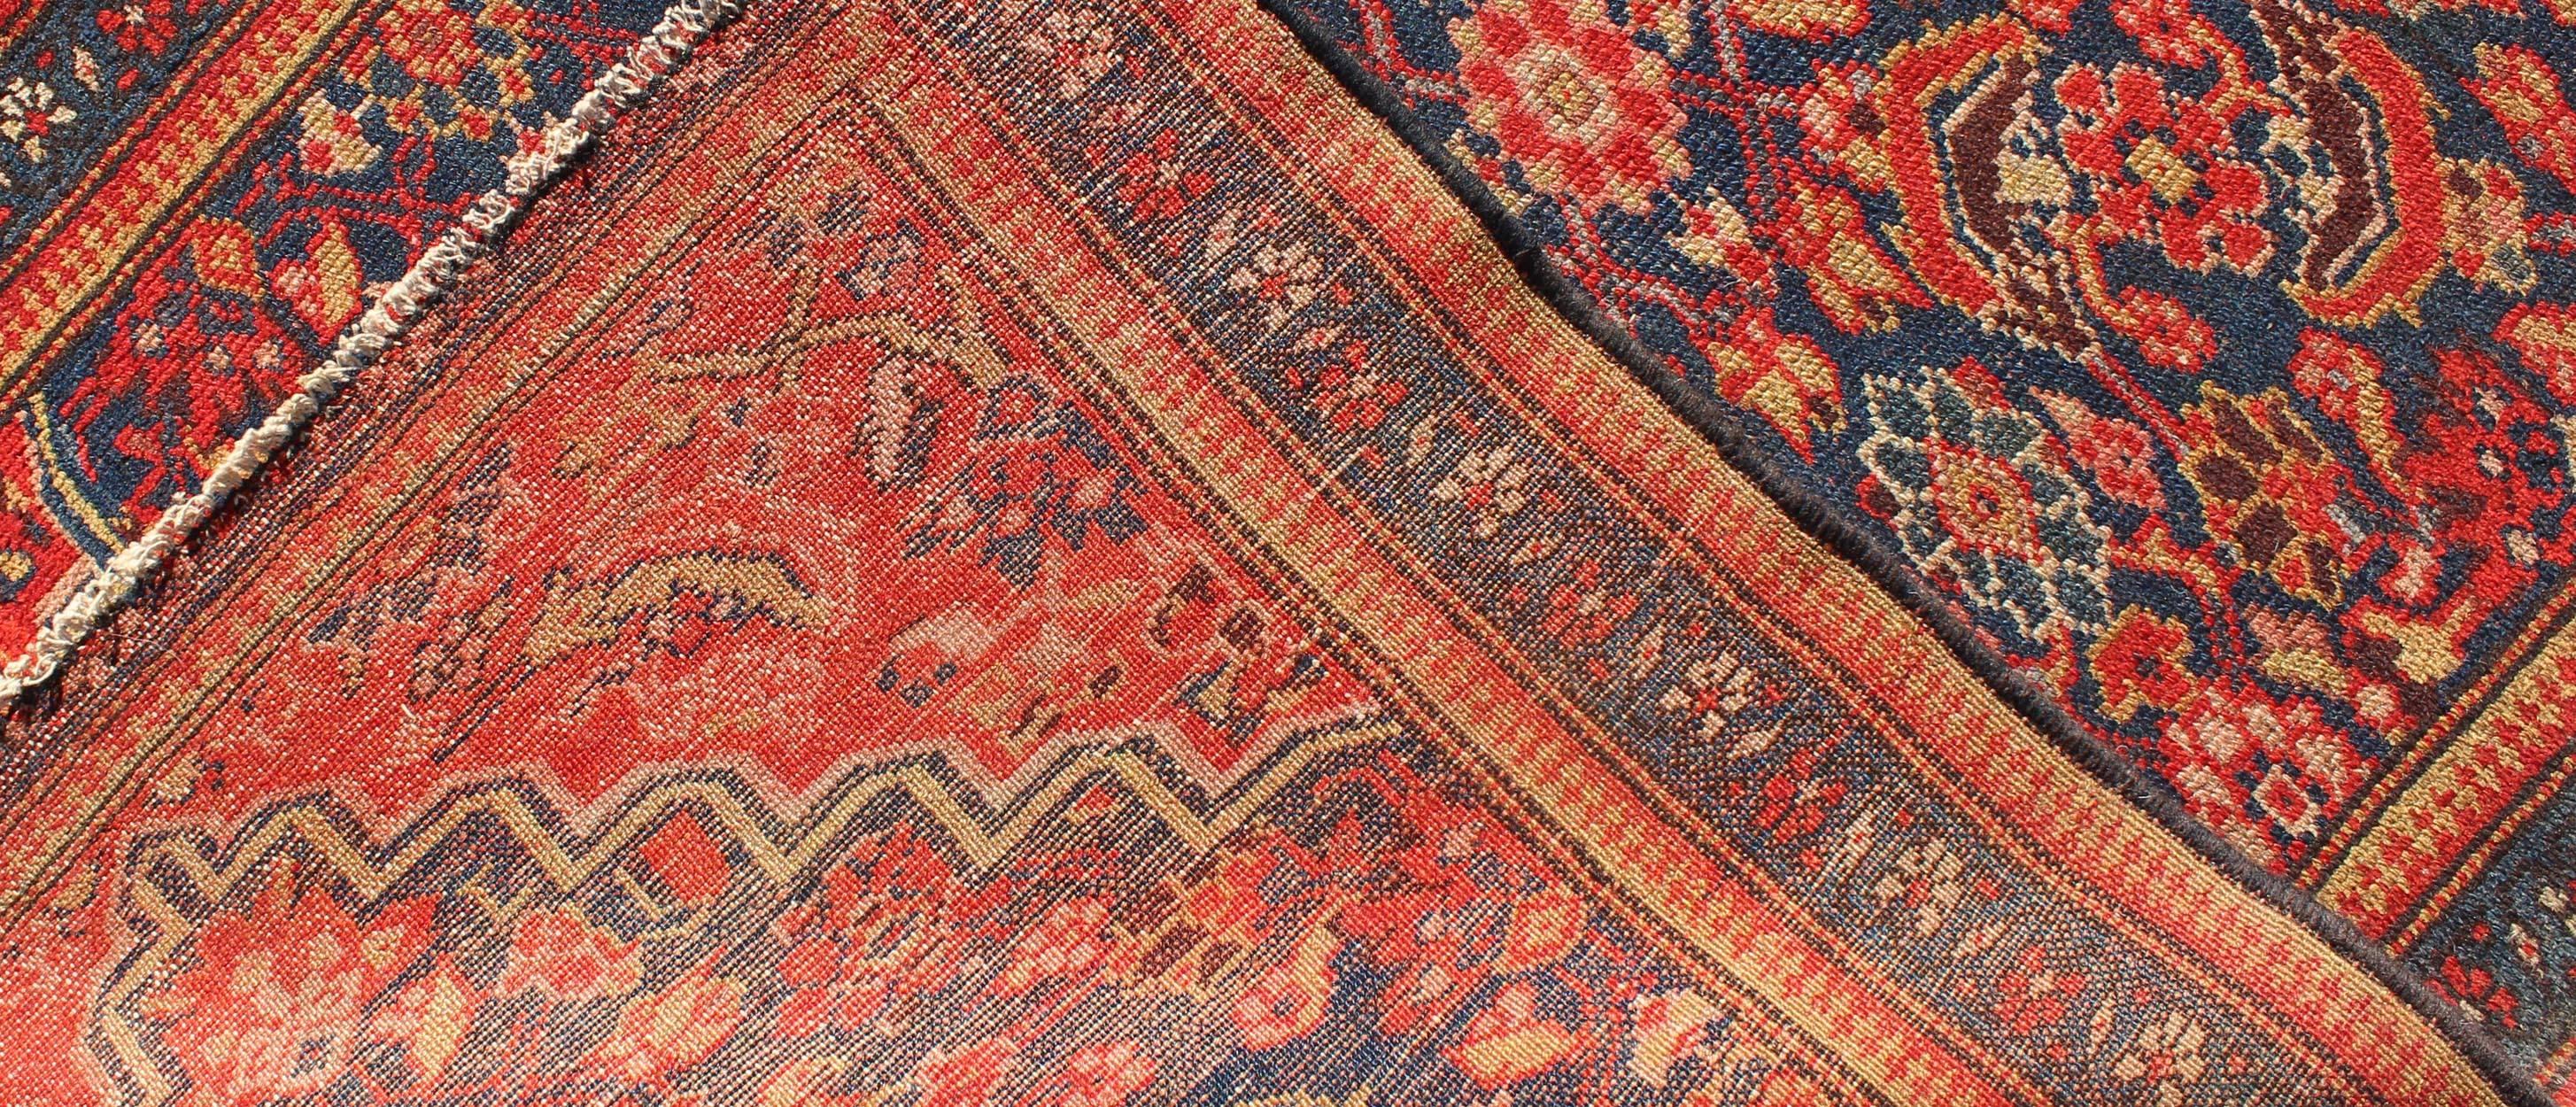 Red and Blue Antique Persian Malayer Rug with All-Over Floral Design For Sale 1